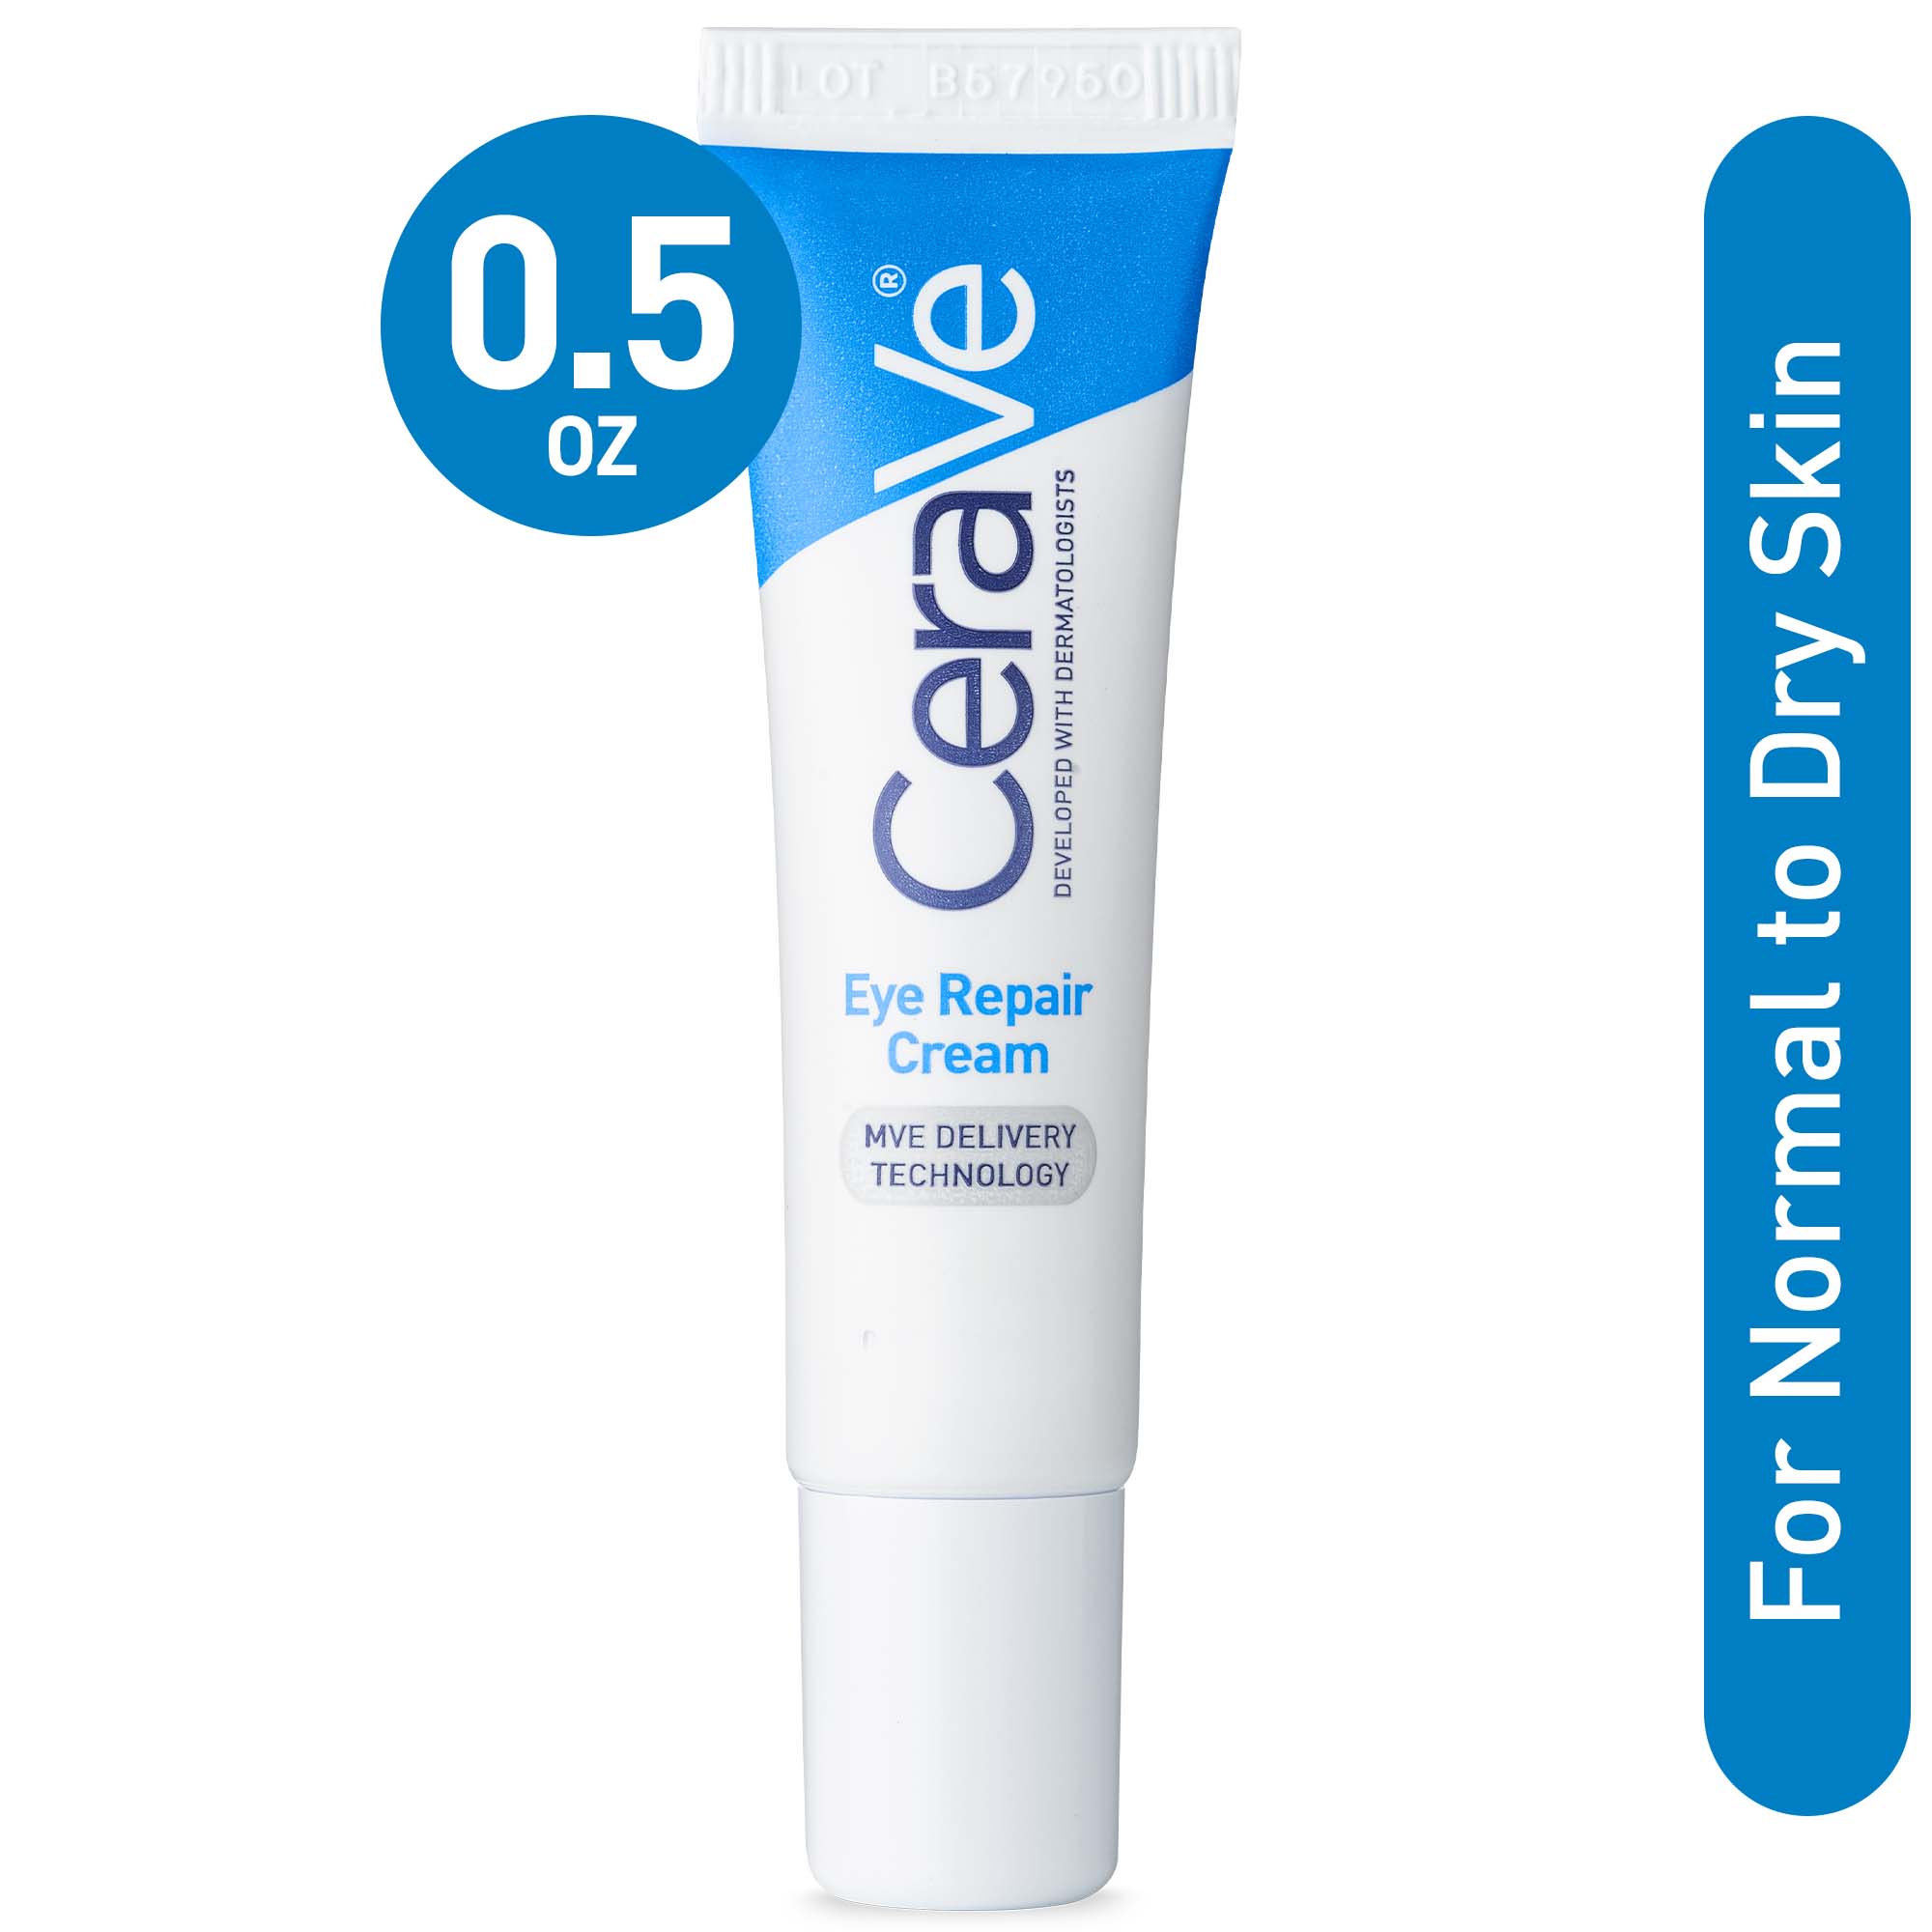 CeraVe Eye Repair Cream for Dark Circles and Puffiness for All Skin Types, 0.5 oz - image 1 of 18